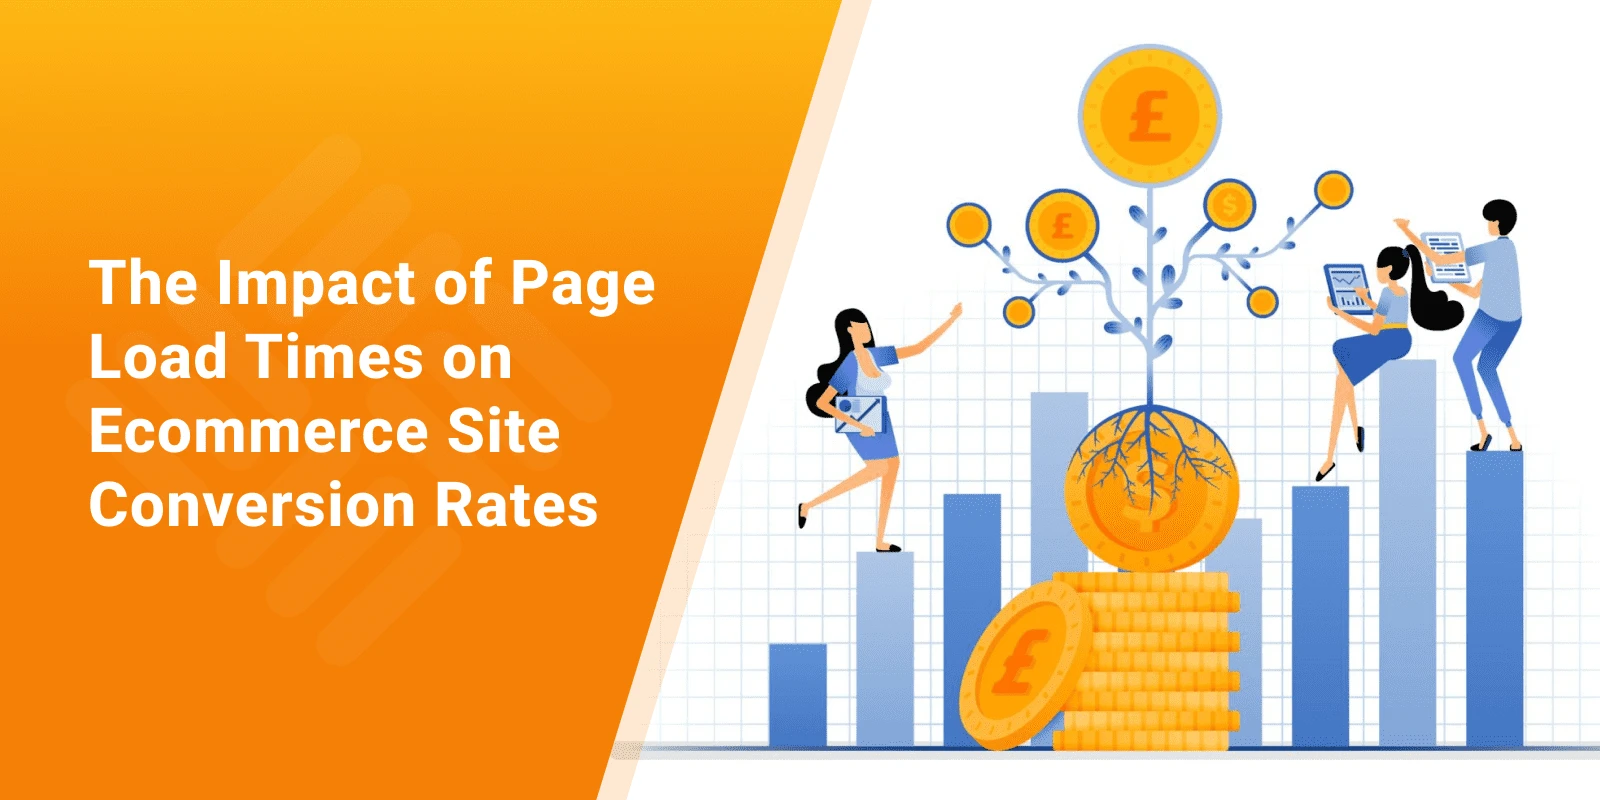 The Impact of Page Load Times on Ecommerce Site Conversion Rates